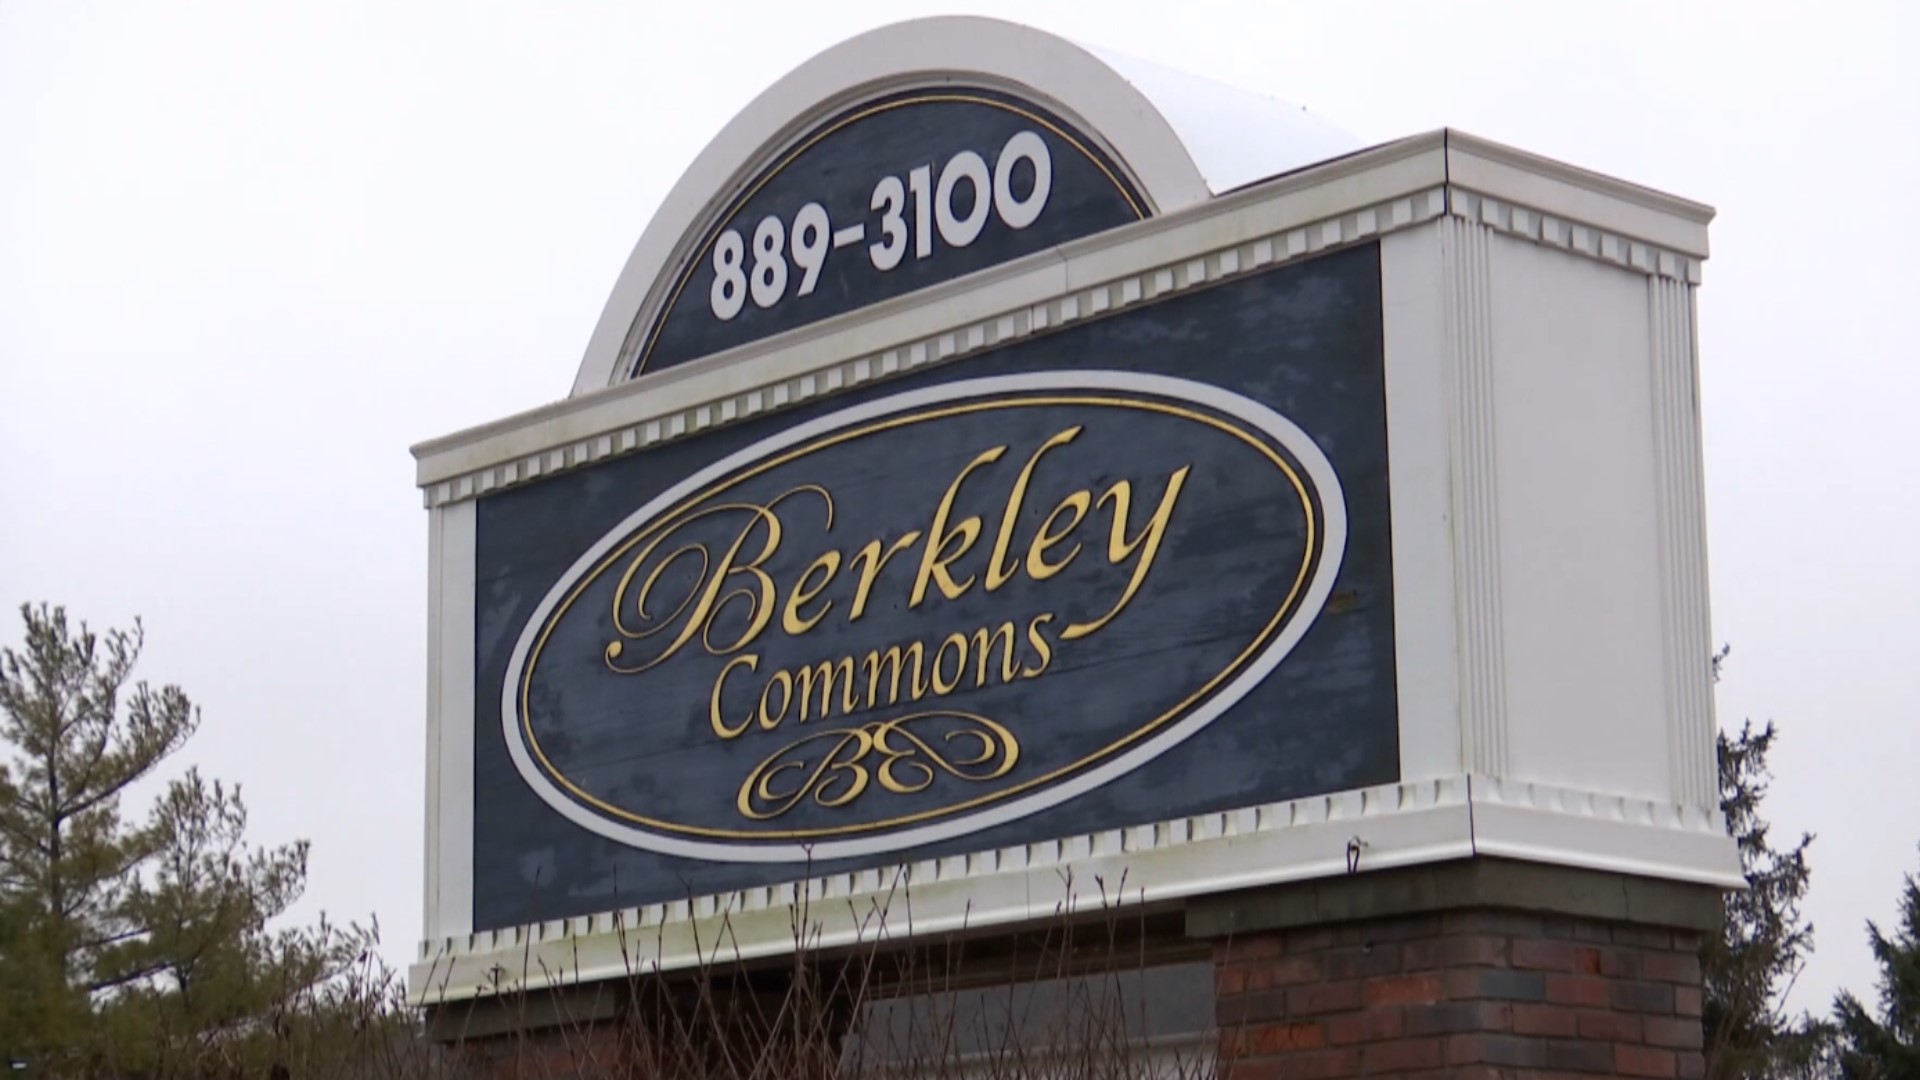 Earlier in 2022, people living at Berkley Commons had their water cut off. Since then, Indiana Attorney General Todd Rokita and the city filed separate lawsuits.